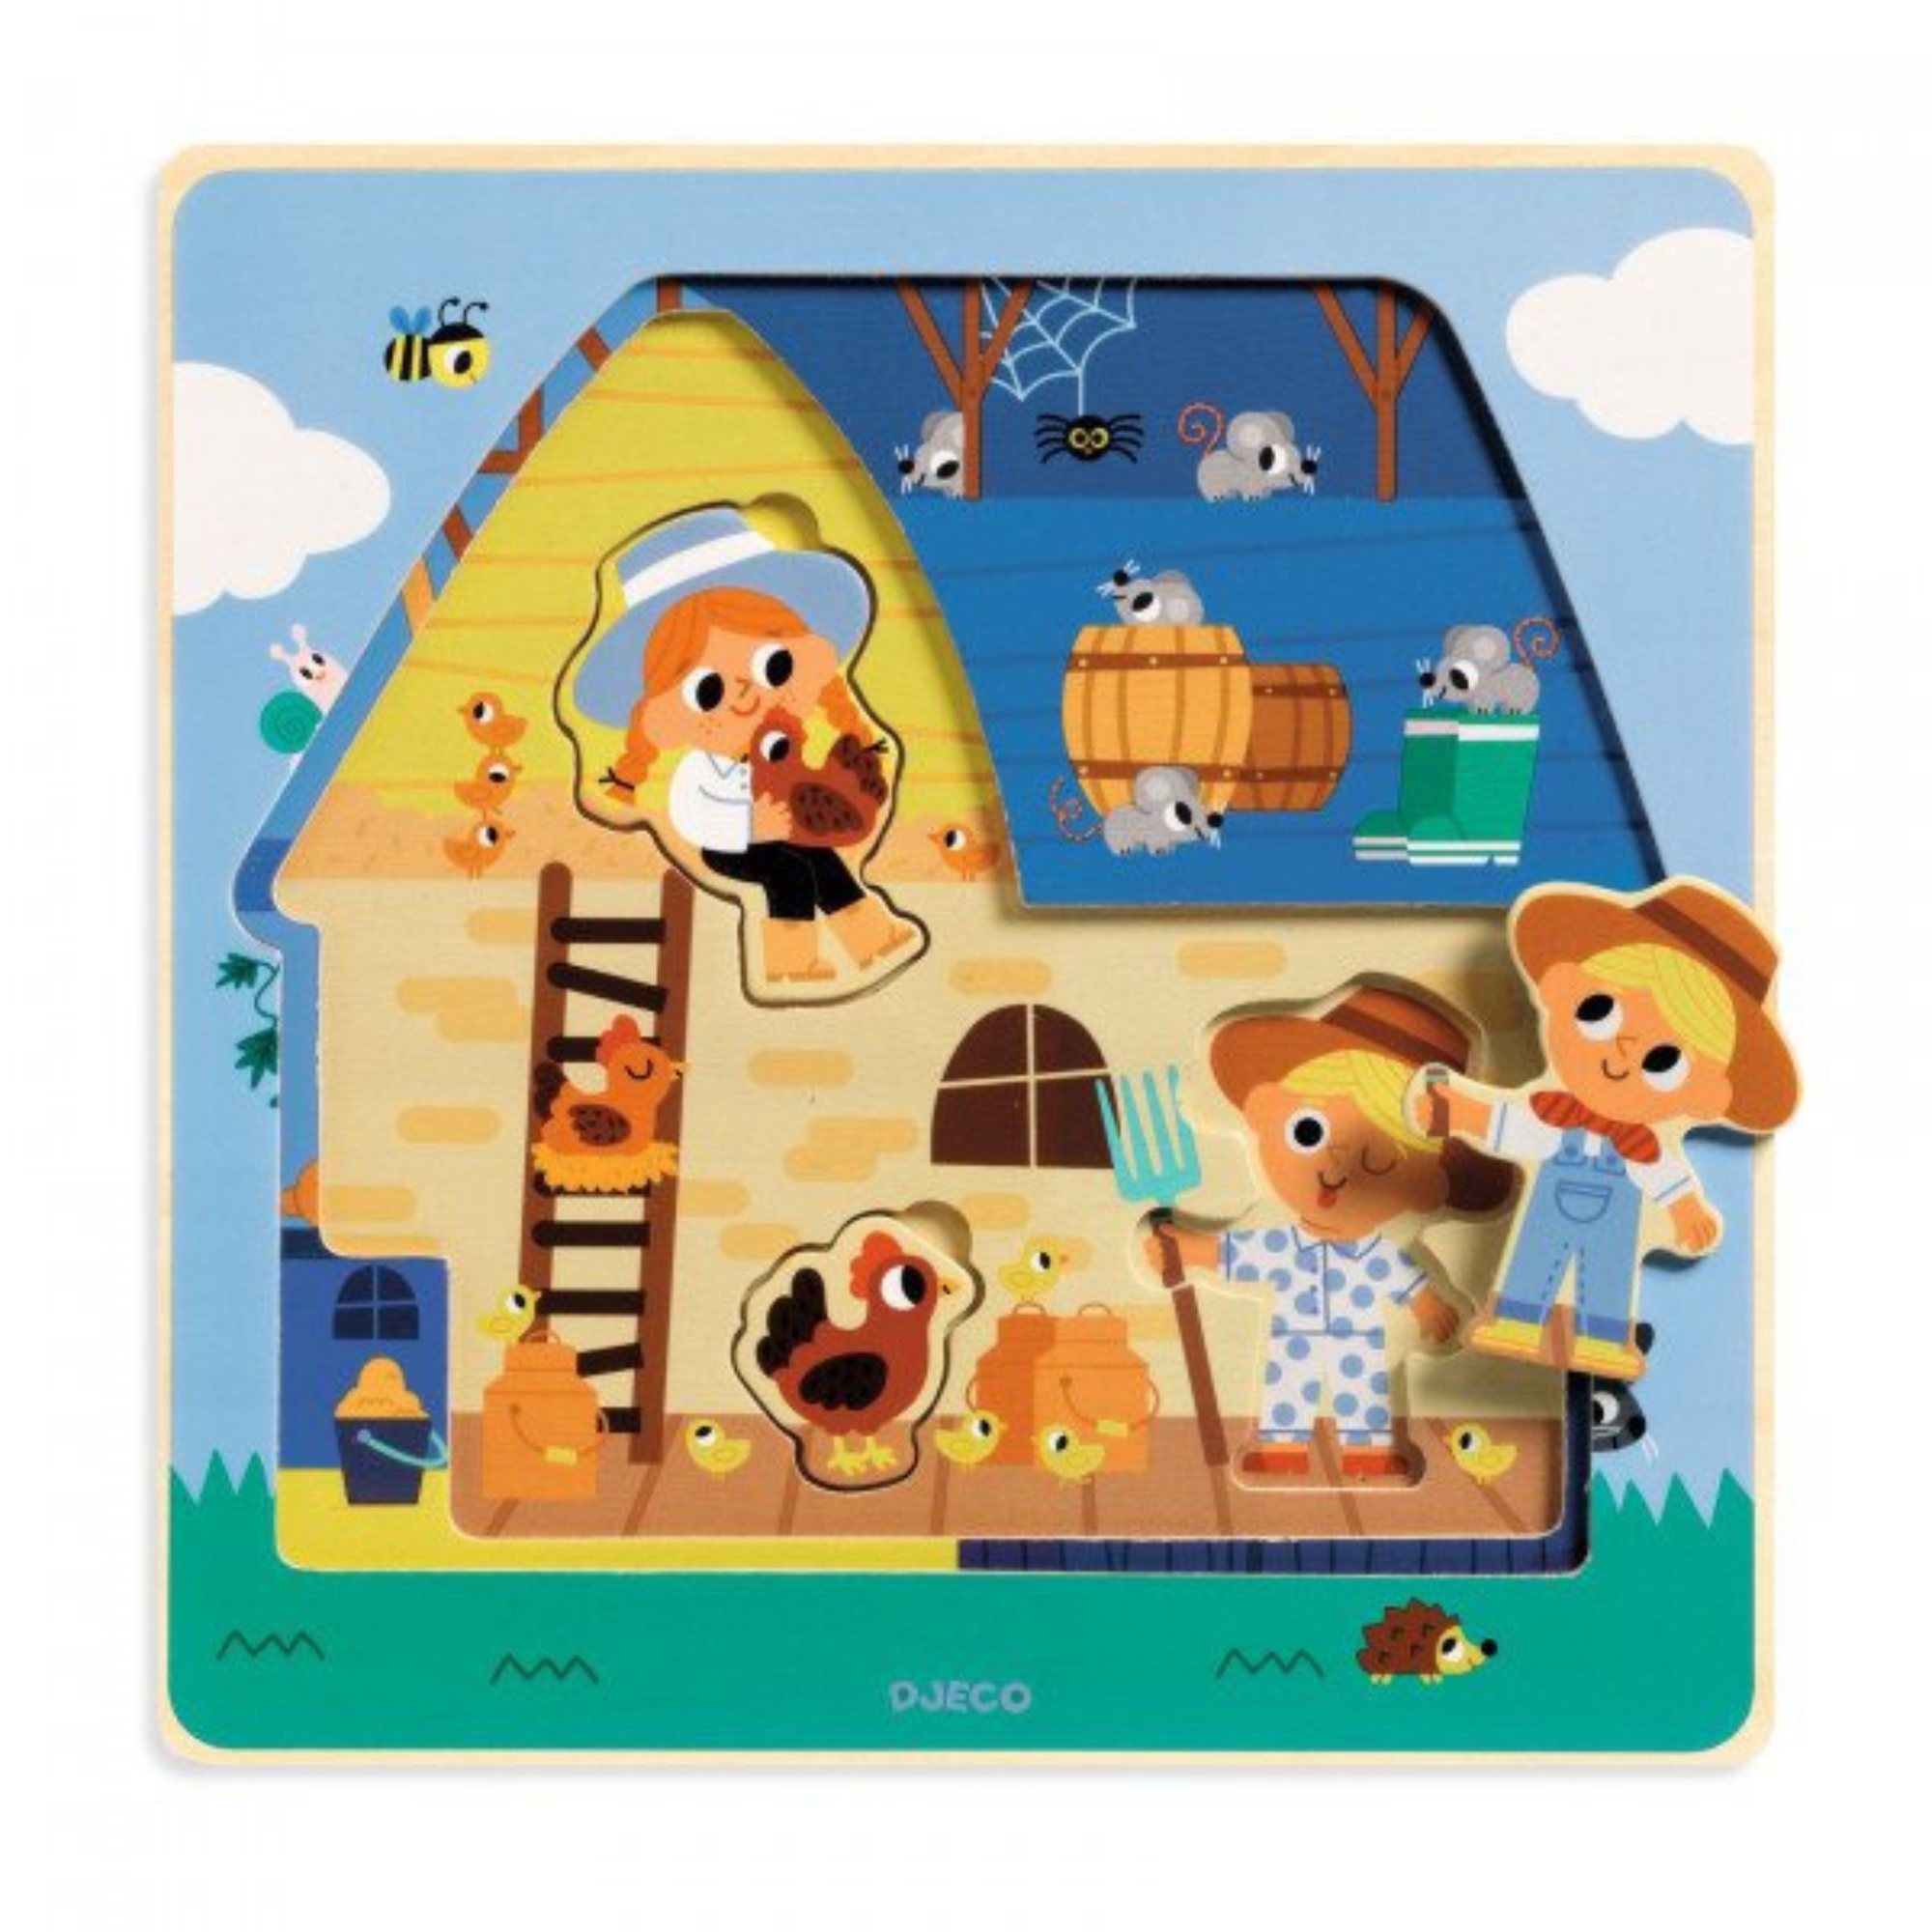 3-layer wooden puzzle - Pas Moo